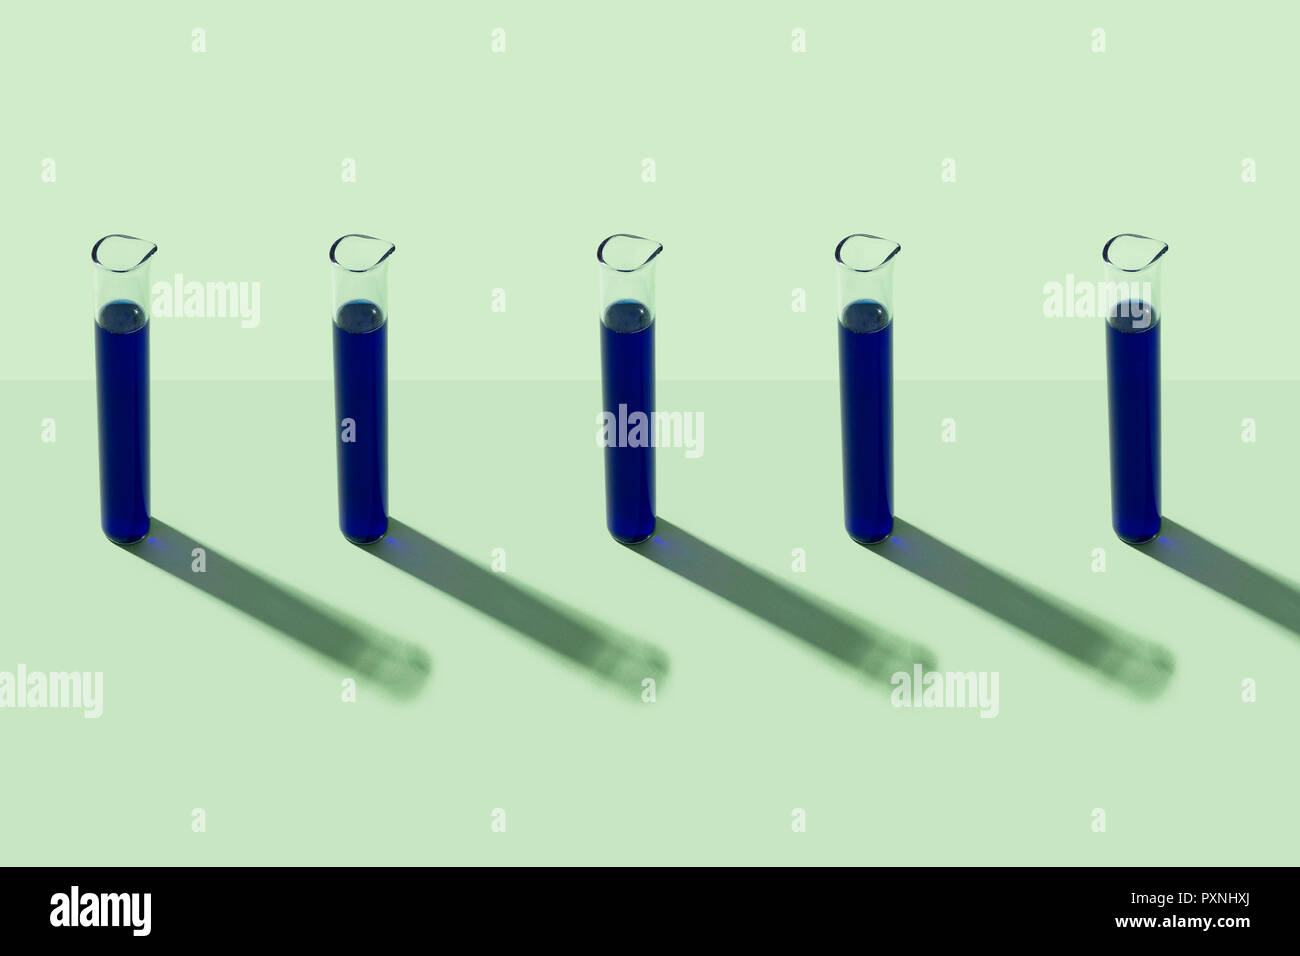 Row of test tubes with blue liquid, green background Stock Photo